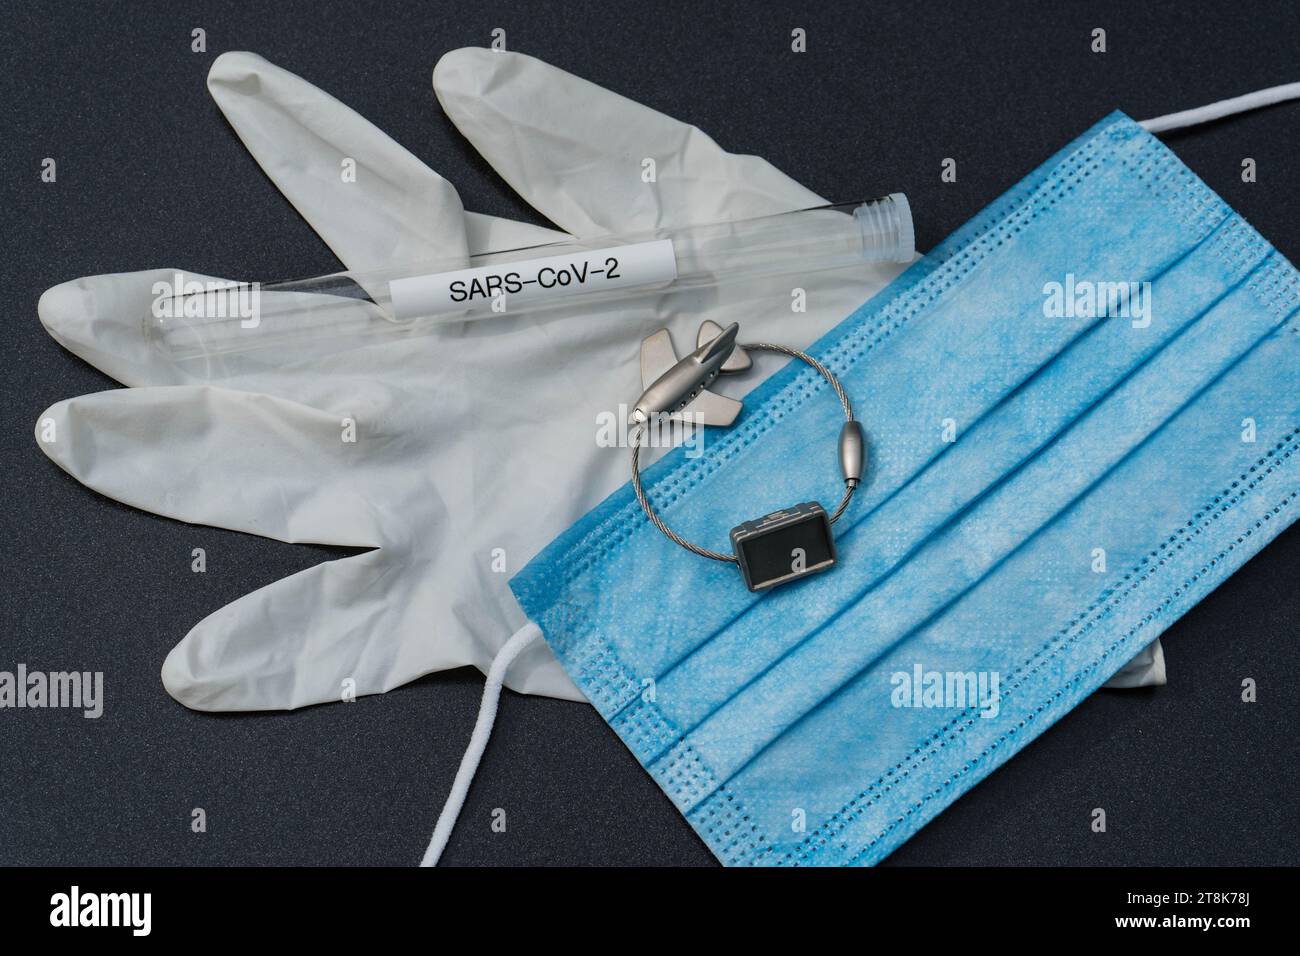 latex glove, test tubule, mask, and luggage tag with plane, flight voyage under Corona conditions Stock Photo